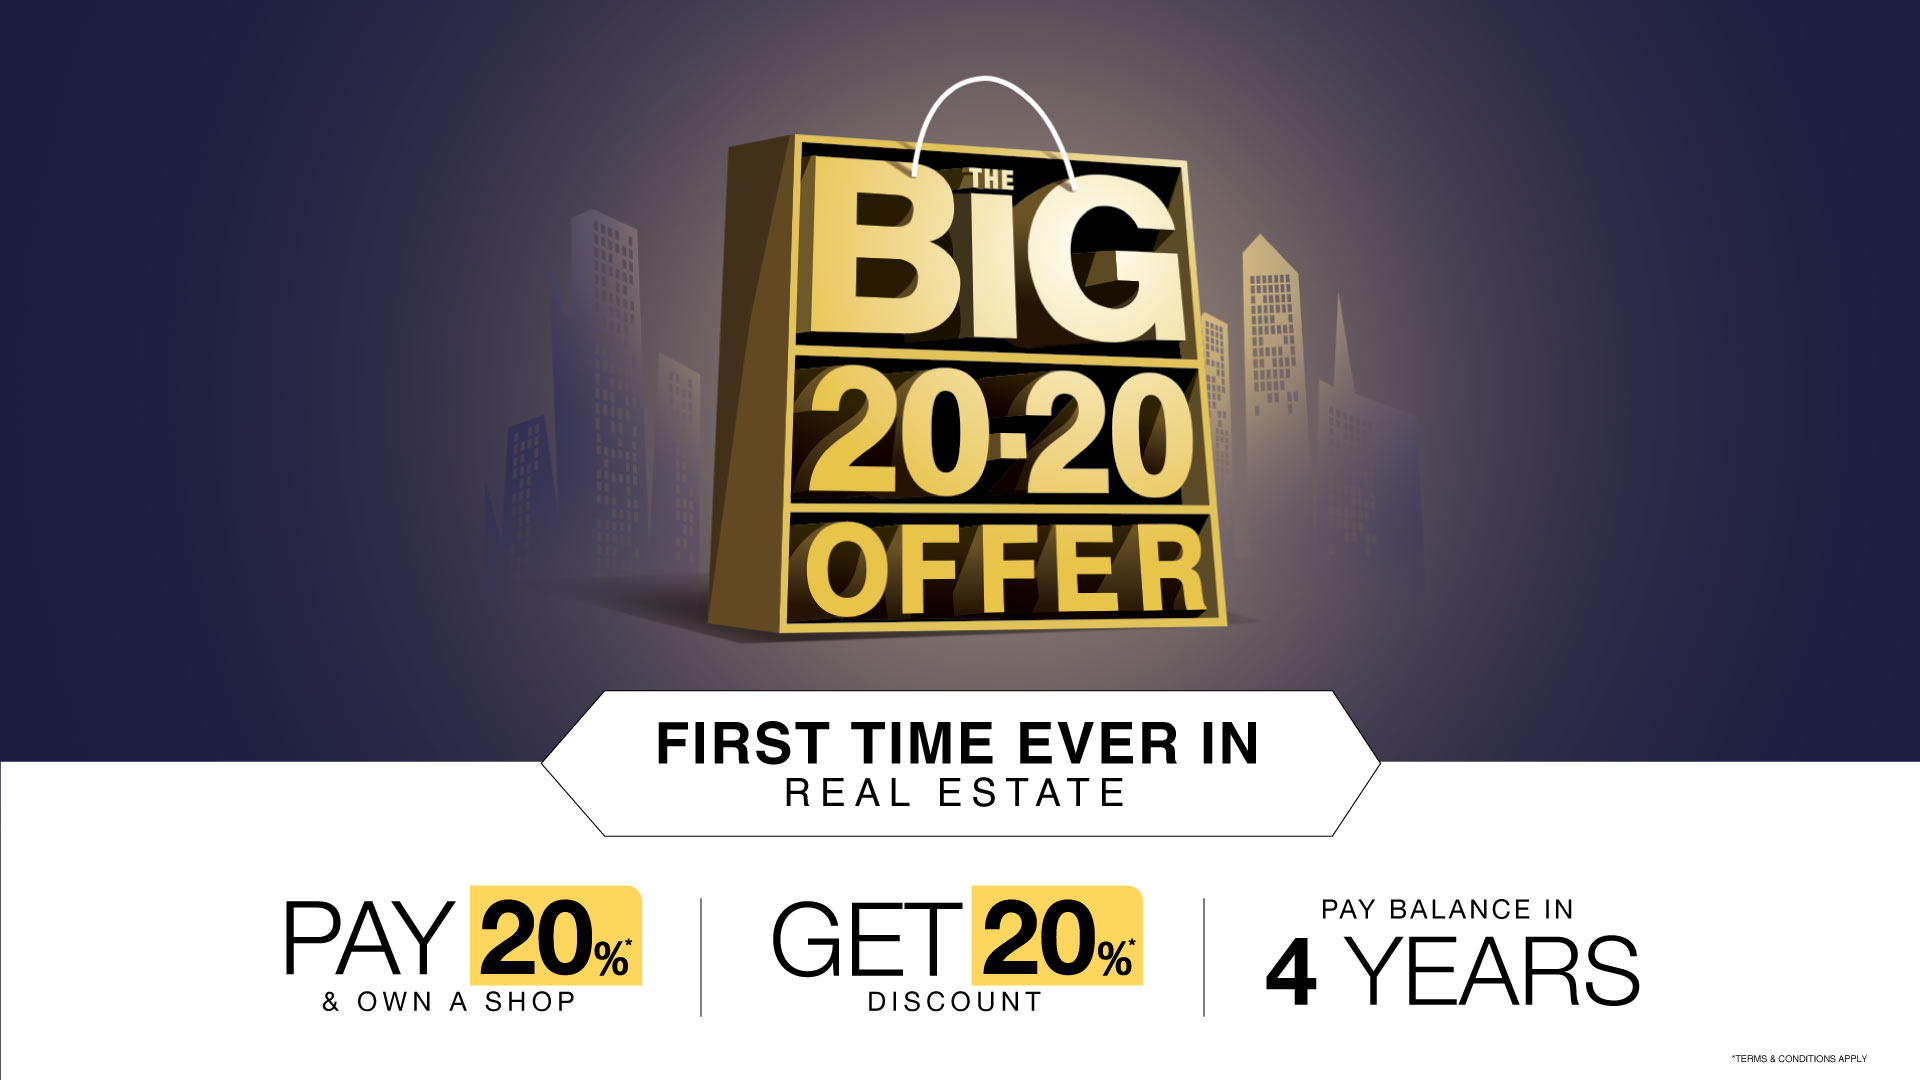 M3M Big 20-20 Offer for Commercial Properties